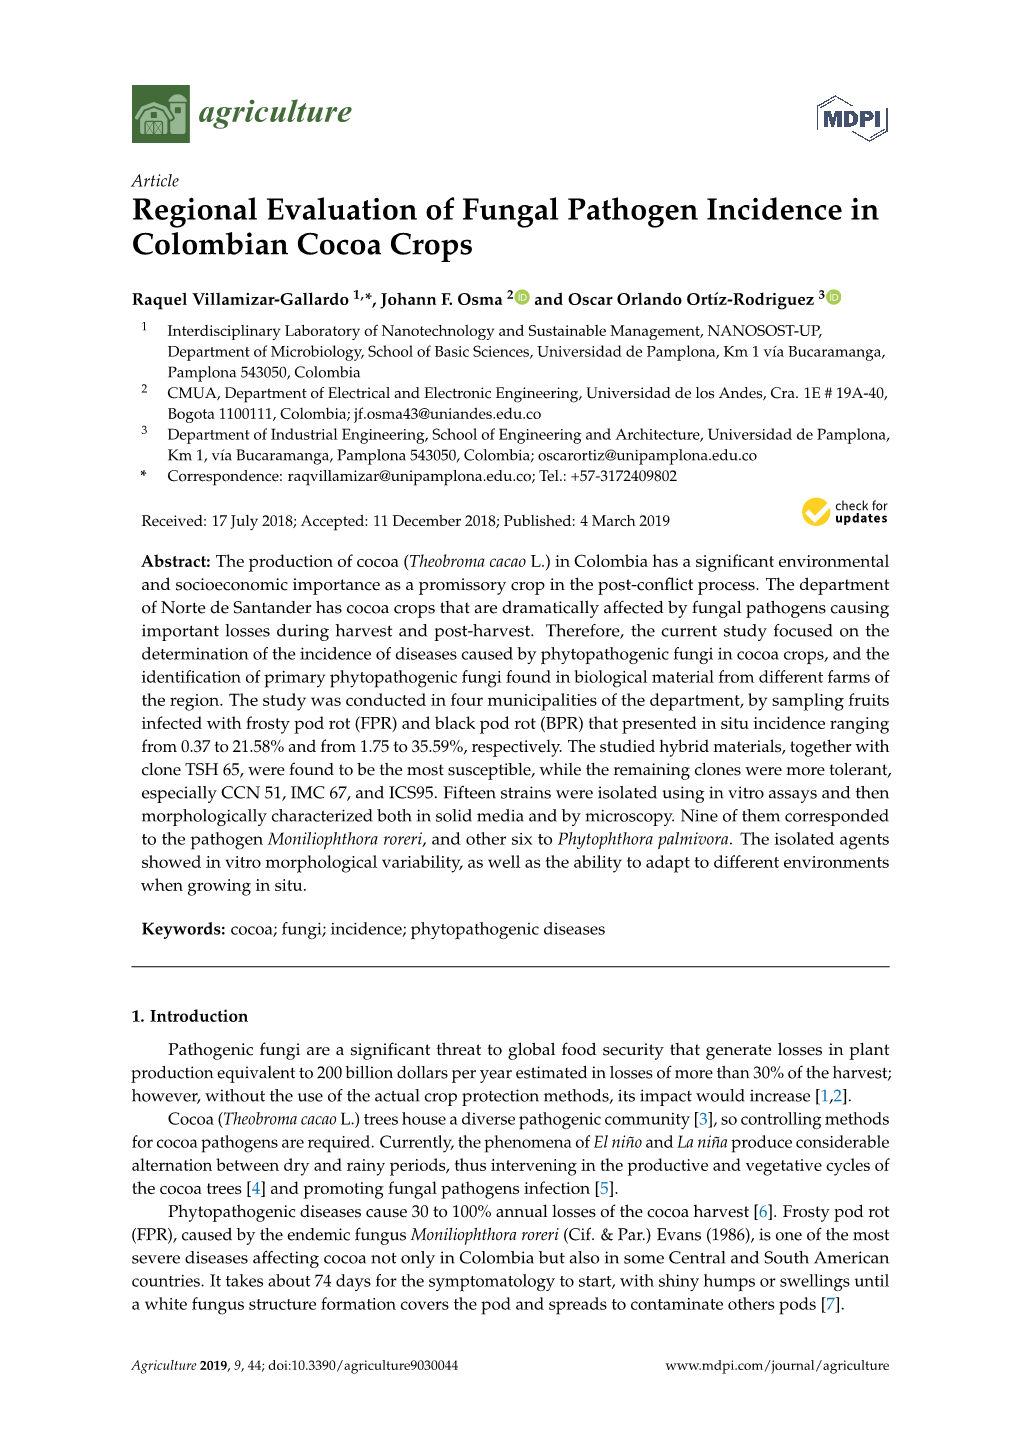 Regional Evaluation of Fungal Pathogen Incidence in Colombian Cocoa Crops